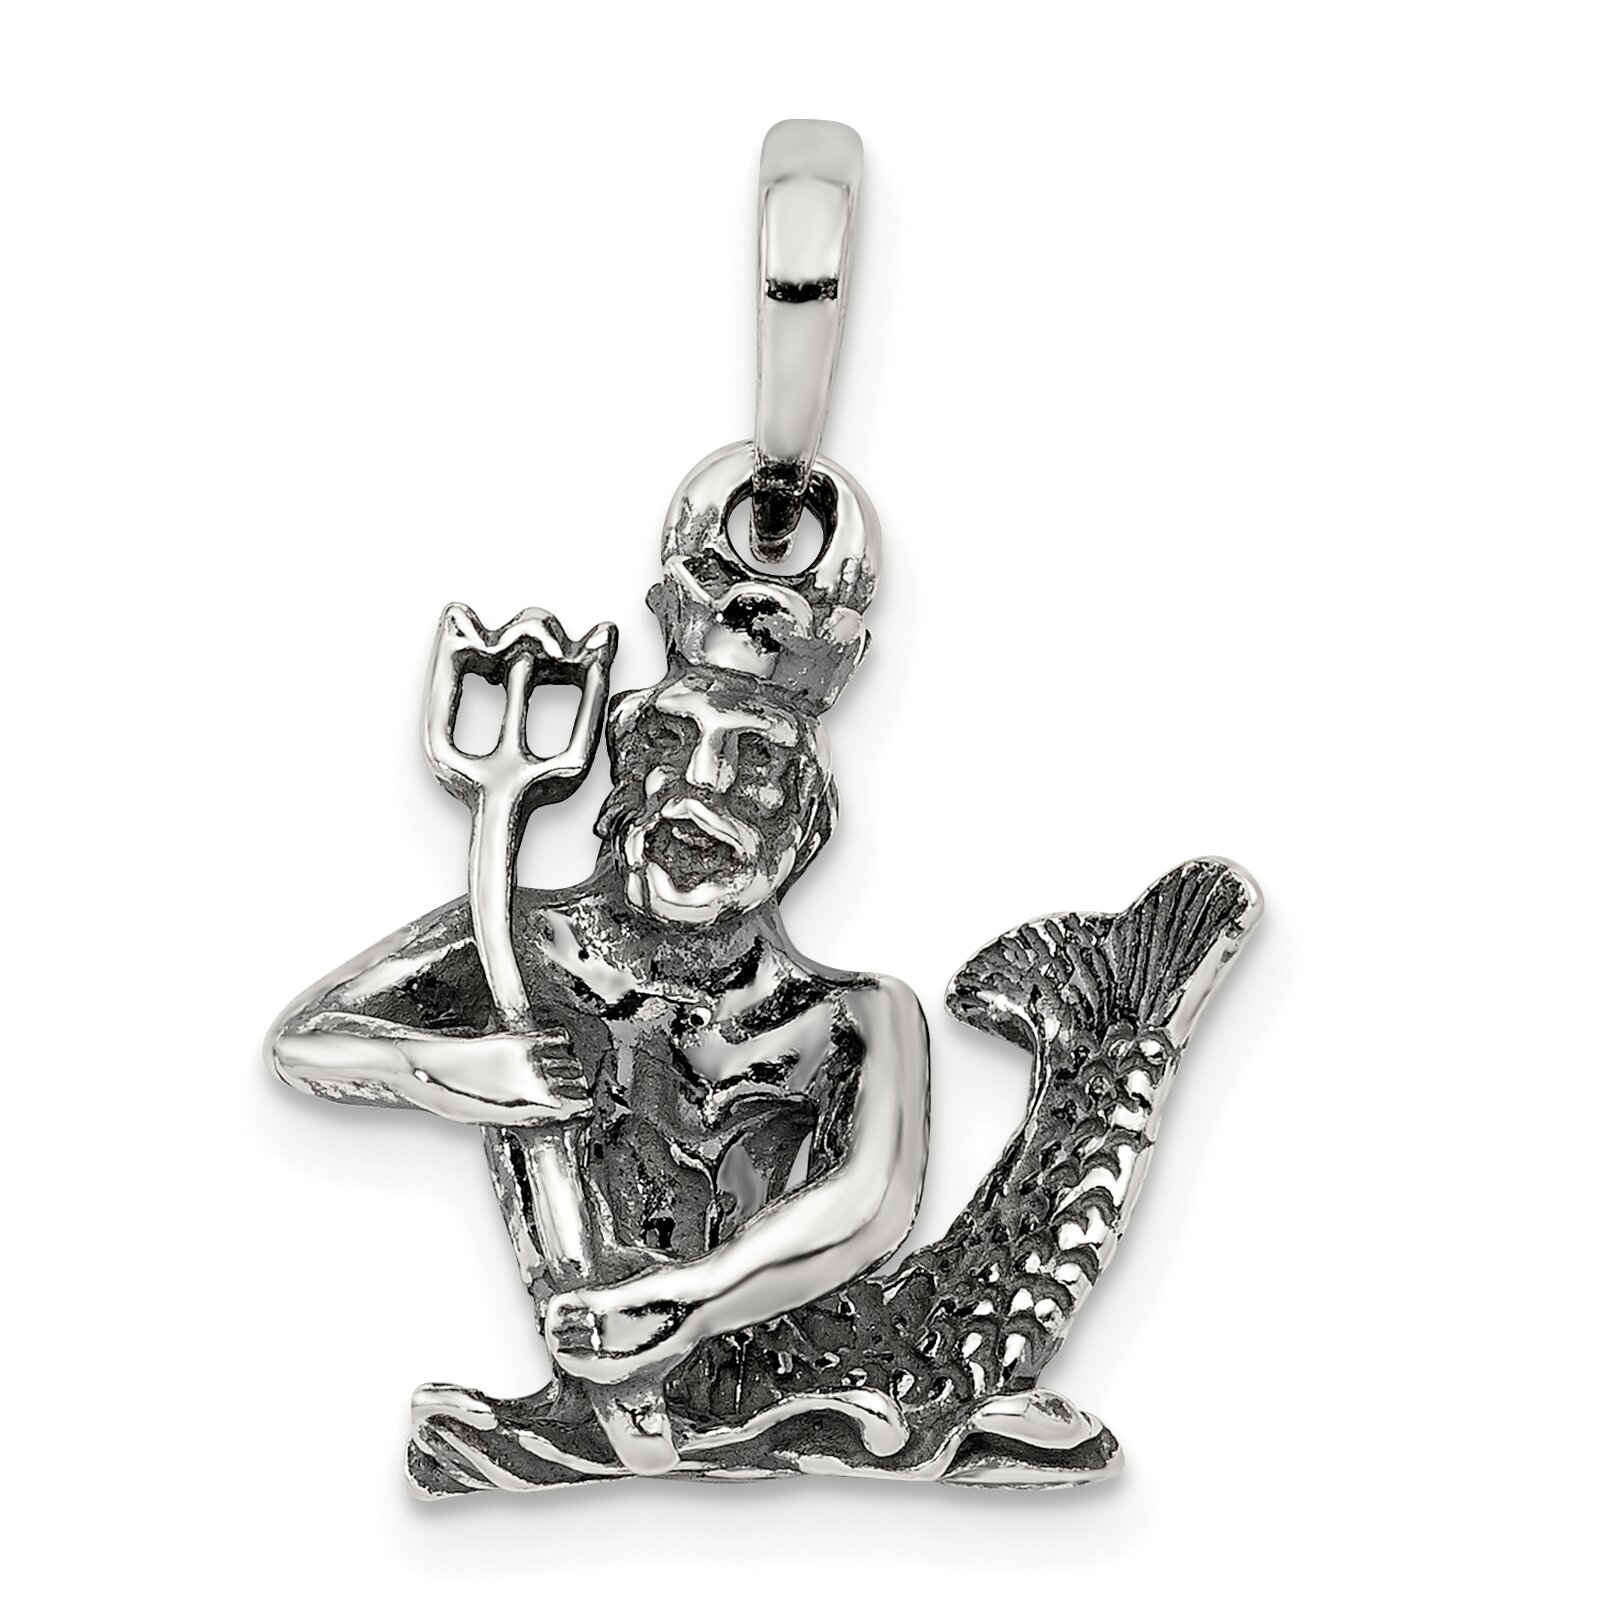 Findingking Sterling Silver Charm